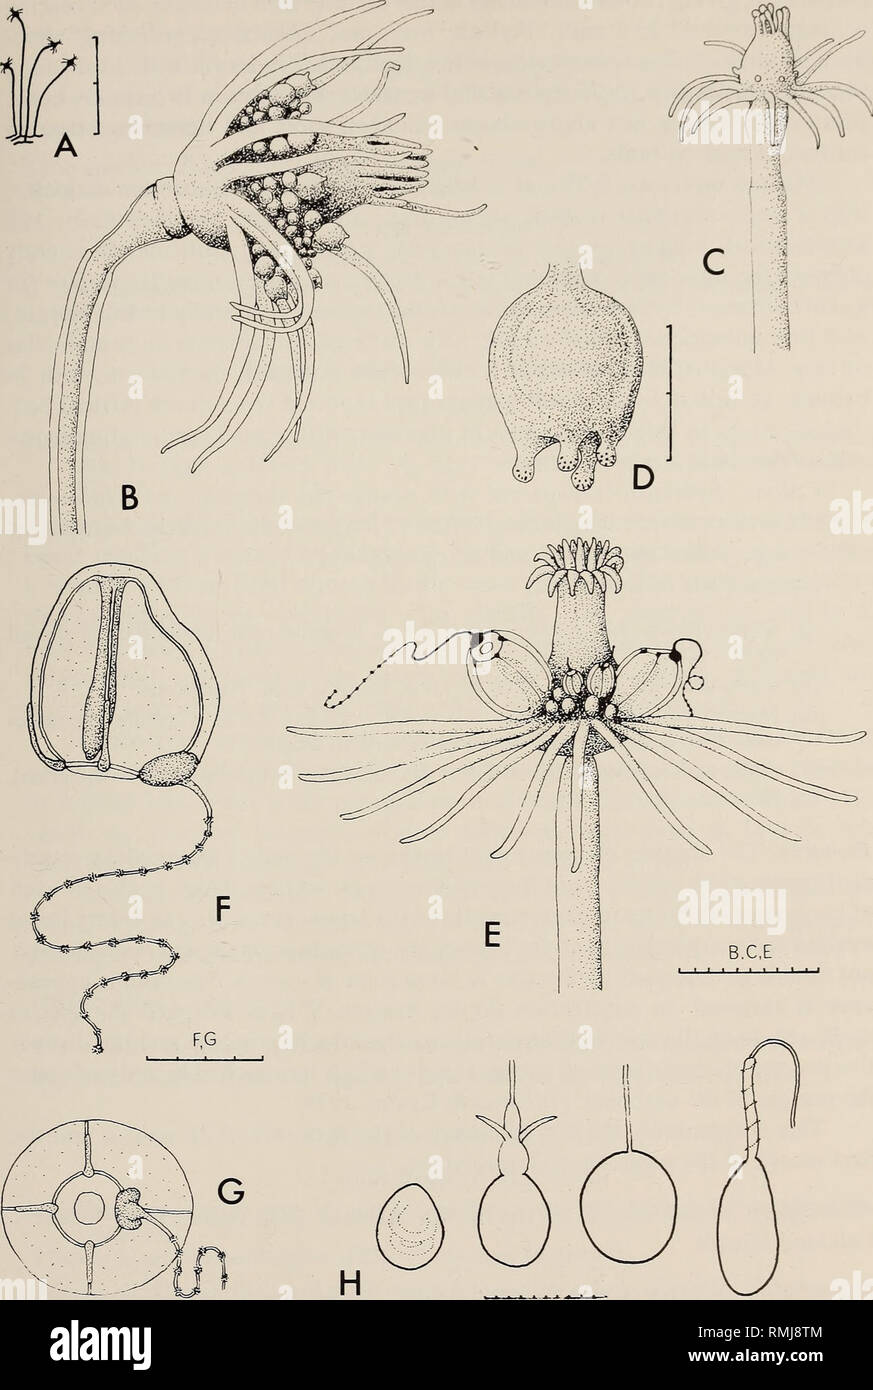 . Annals of the South African Museum = Annale van die Suid-Afrikaanse Museum. Natural history. MONOGRAPH ON THE HYDROIDA OF SOUTHERN AFRICA 33. Fig. 14. Ectopleura bethae. A, colony; B, mature hydranth with medusa-buds; C, young hydranth with capitate oral tentacles; D, oldest medusa-bud found. Hybocodon unicus. E, mature hydranth with medusa-buds; F and G, recently hatched medusae, G in ventral view; H, nematocysts, from left to right a desmoneme, stenotele, atrichous isorhiza, microbasic mastigophore. Scale: A in cm, H in /xm, the rest in mm/10.. Please note that these images are extracted f Stock Photo